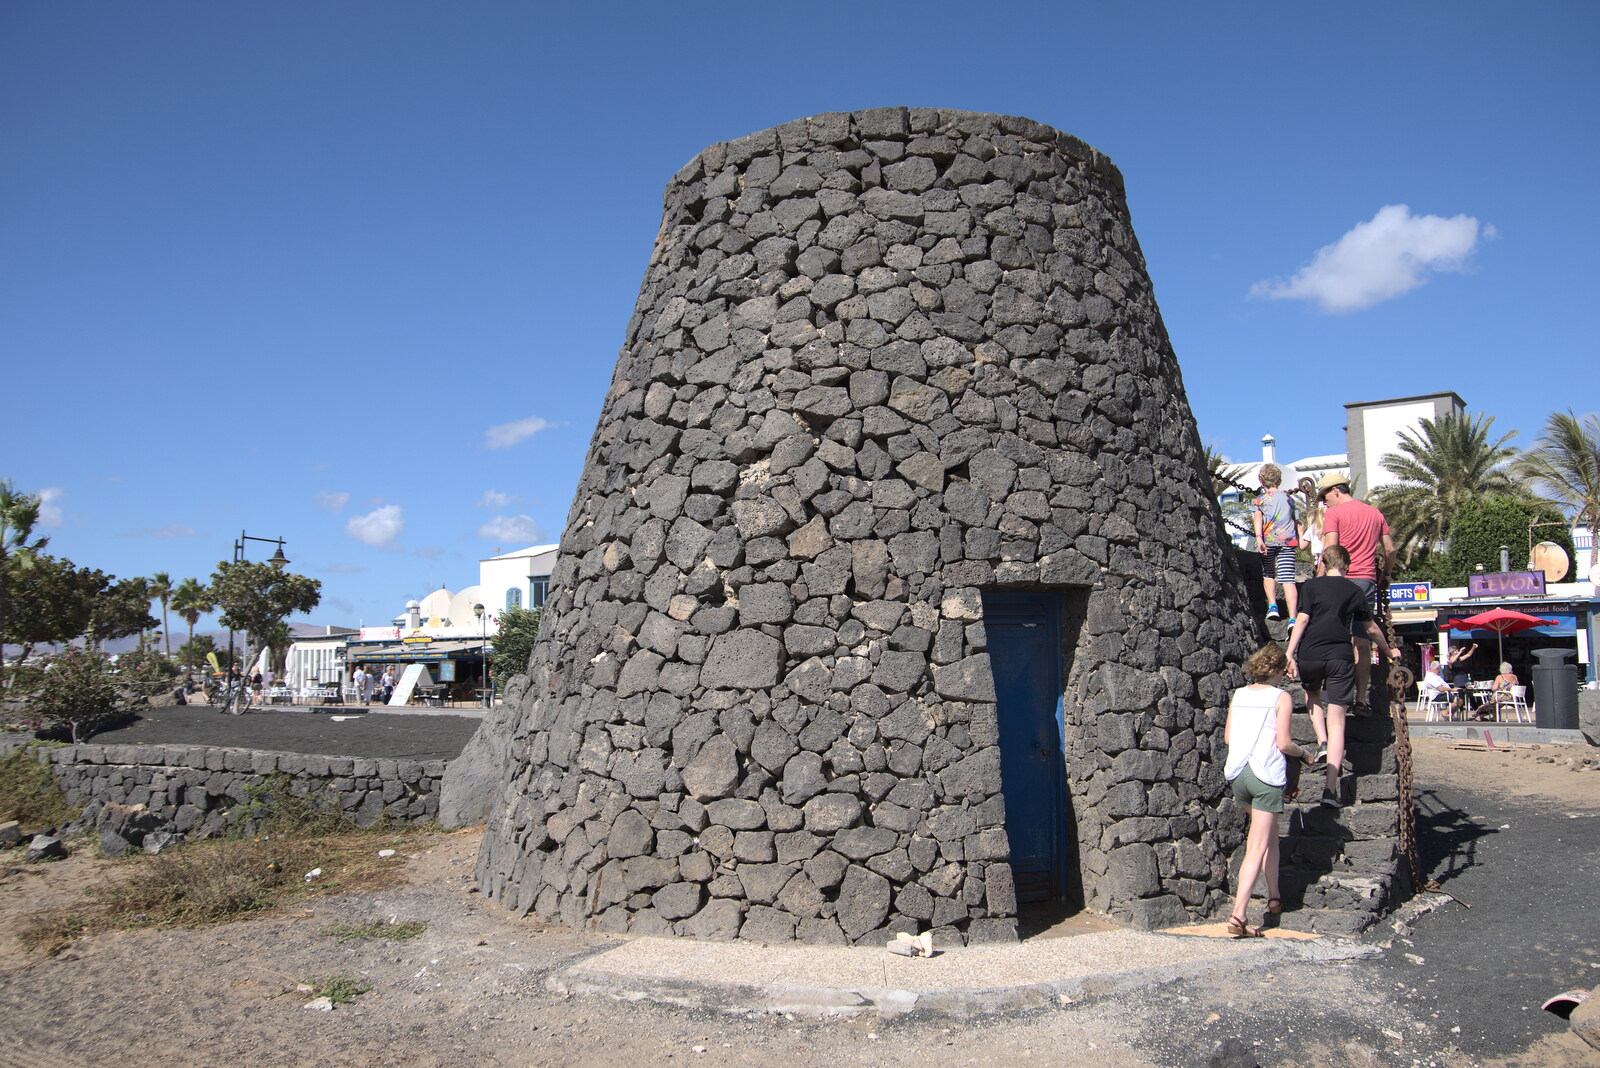 The lava-rock tower on the beach from Five Days in Lanzarote, Canary Islands, Spain - 24th October 2021